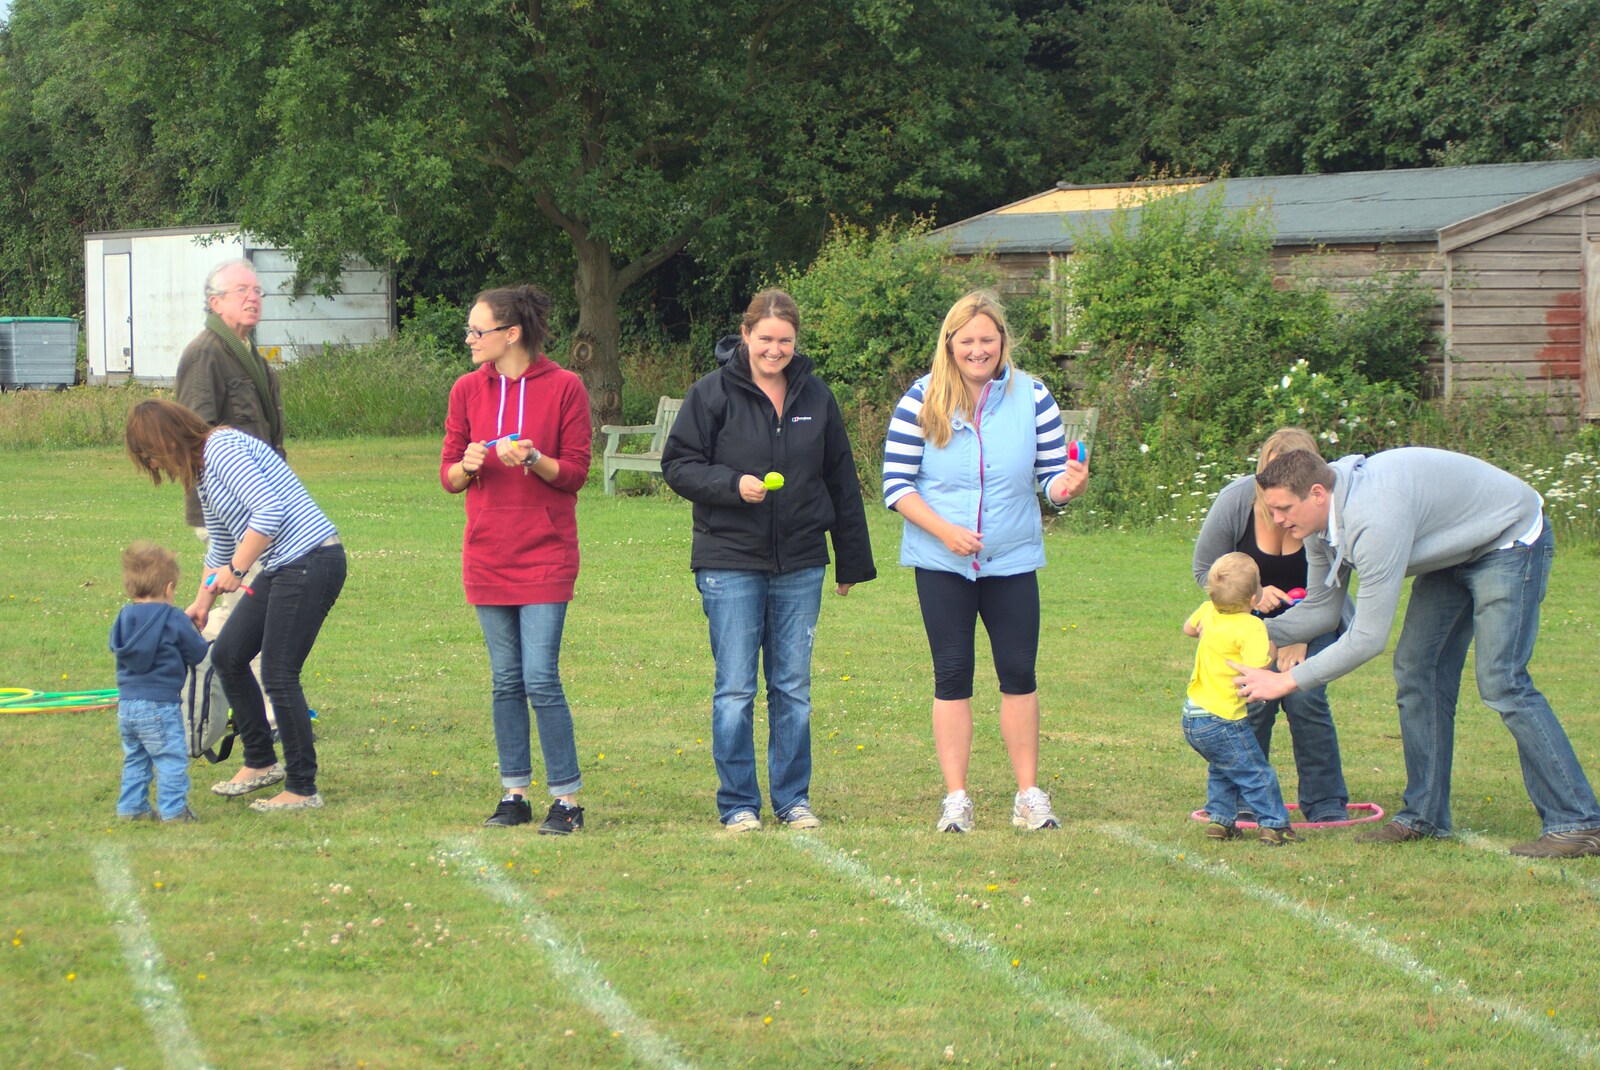 A Mothers' egg and spoon race is assembled from Fred's First Sports Day, Palgrave, Suffolk - 18th June 2011